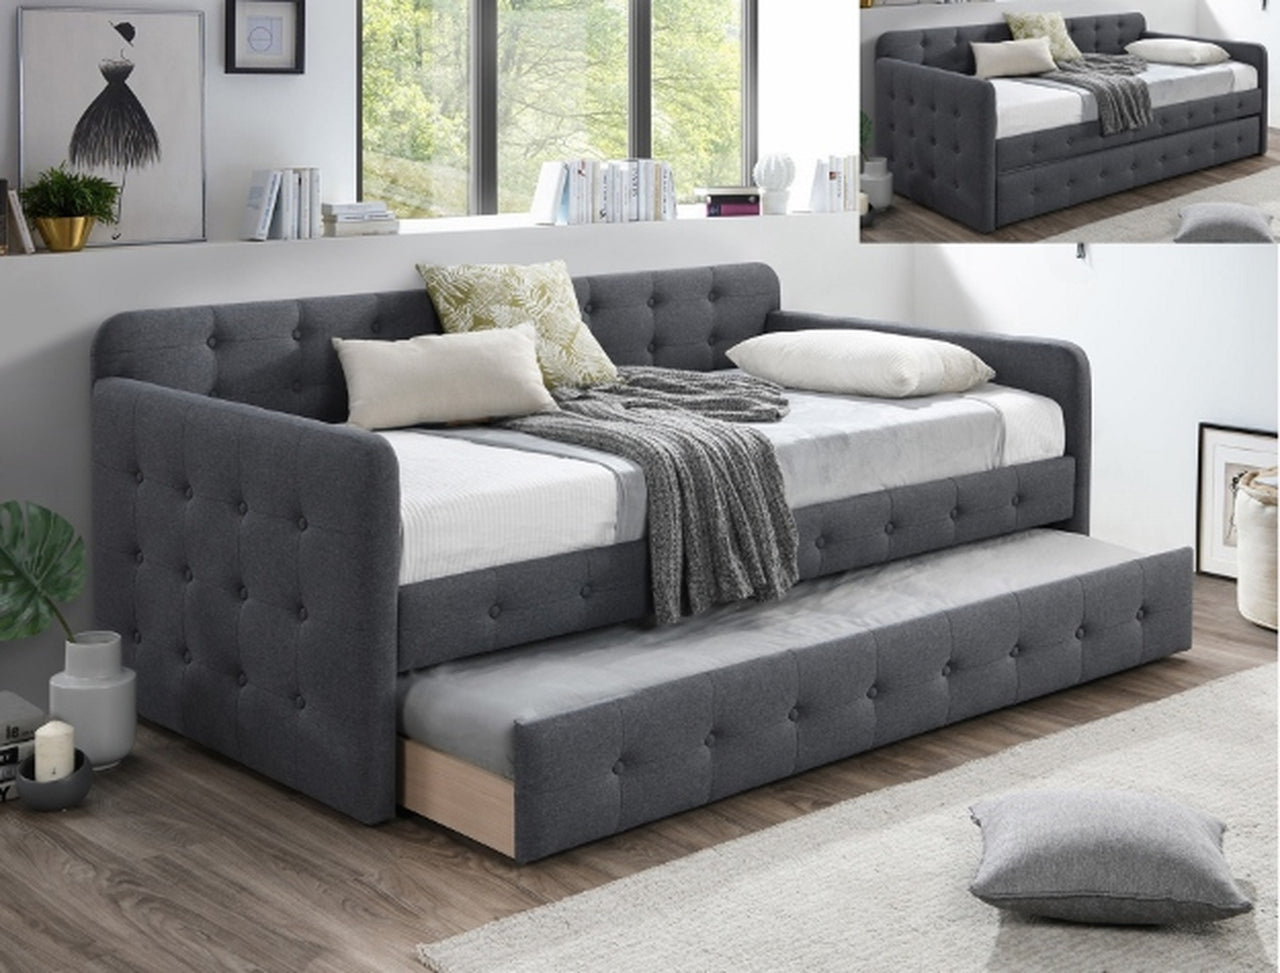 5327 GY-SET HAVEN GRAY DAYBED. COMING SOON.